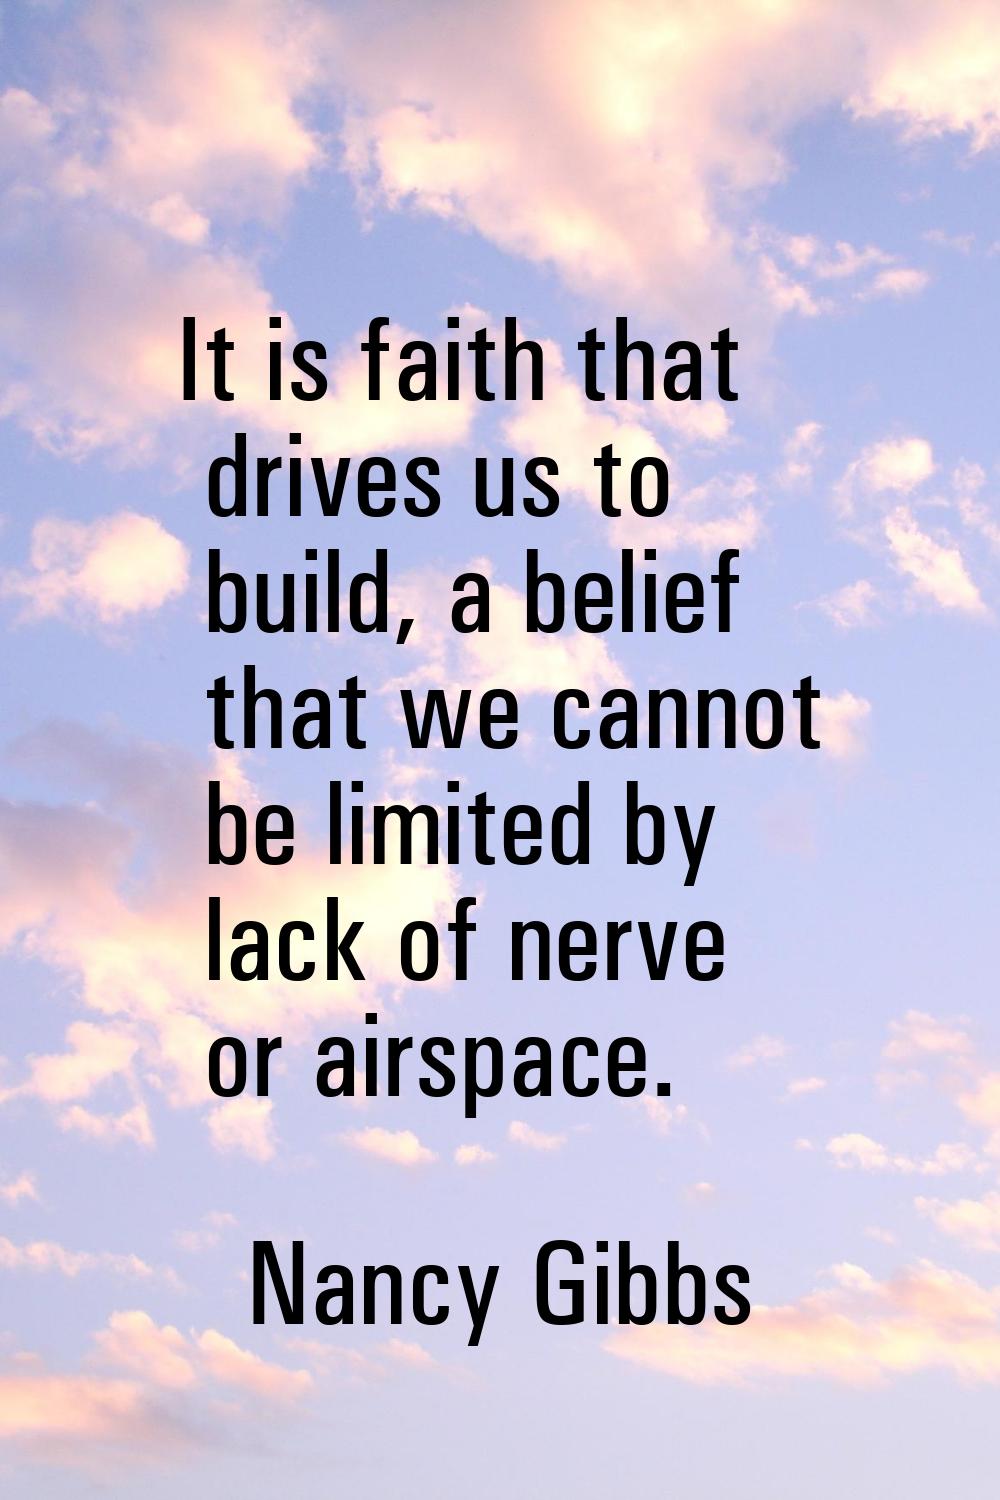 It is faith that drives us to build, a belief that we cannot be limited by lack of nerve or airspac